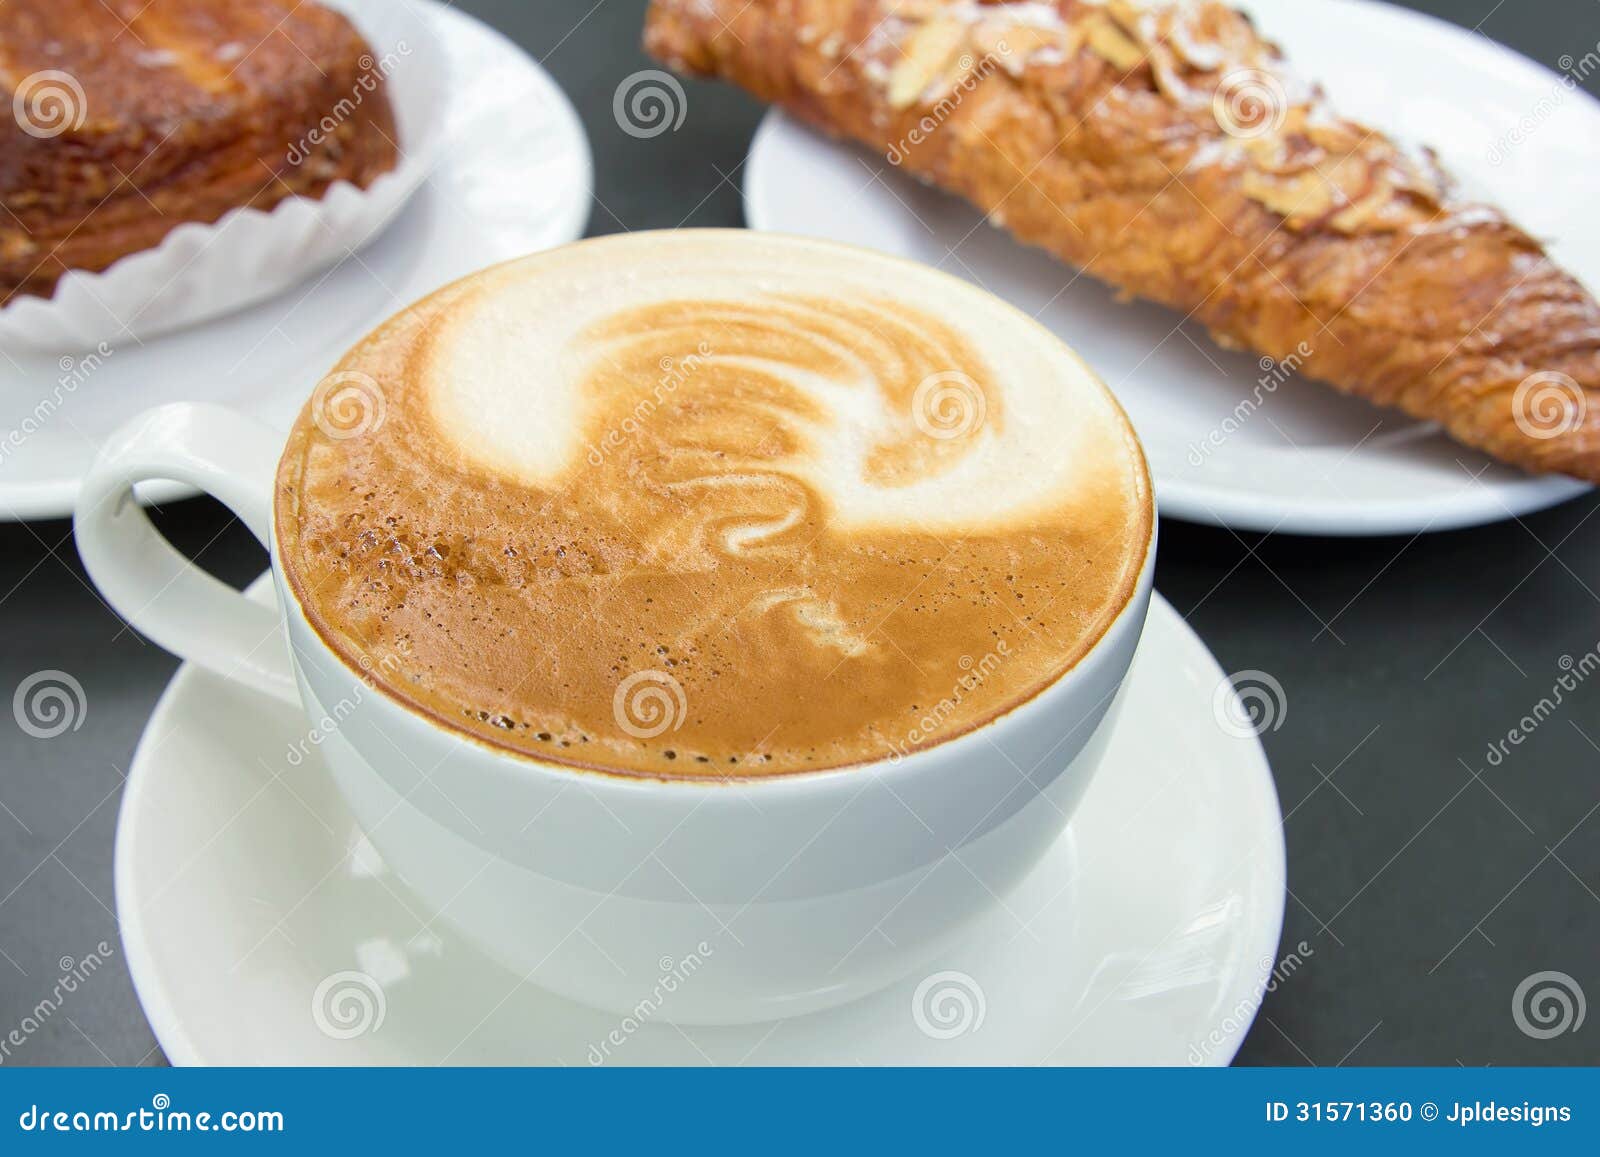 cup of caffe latte with pastry